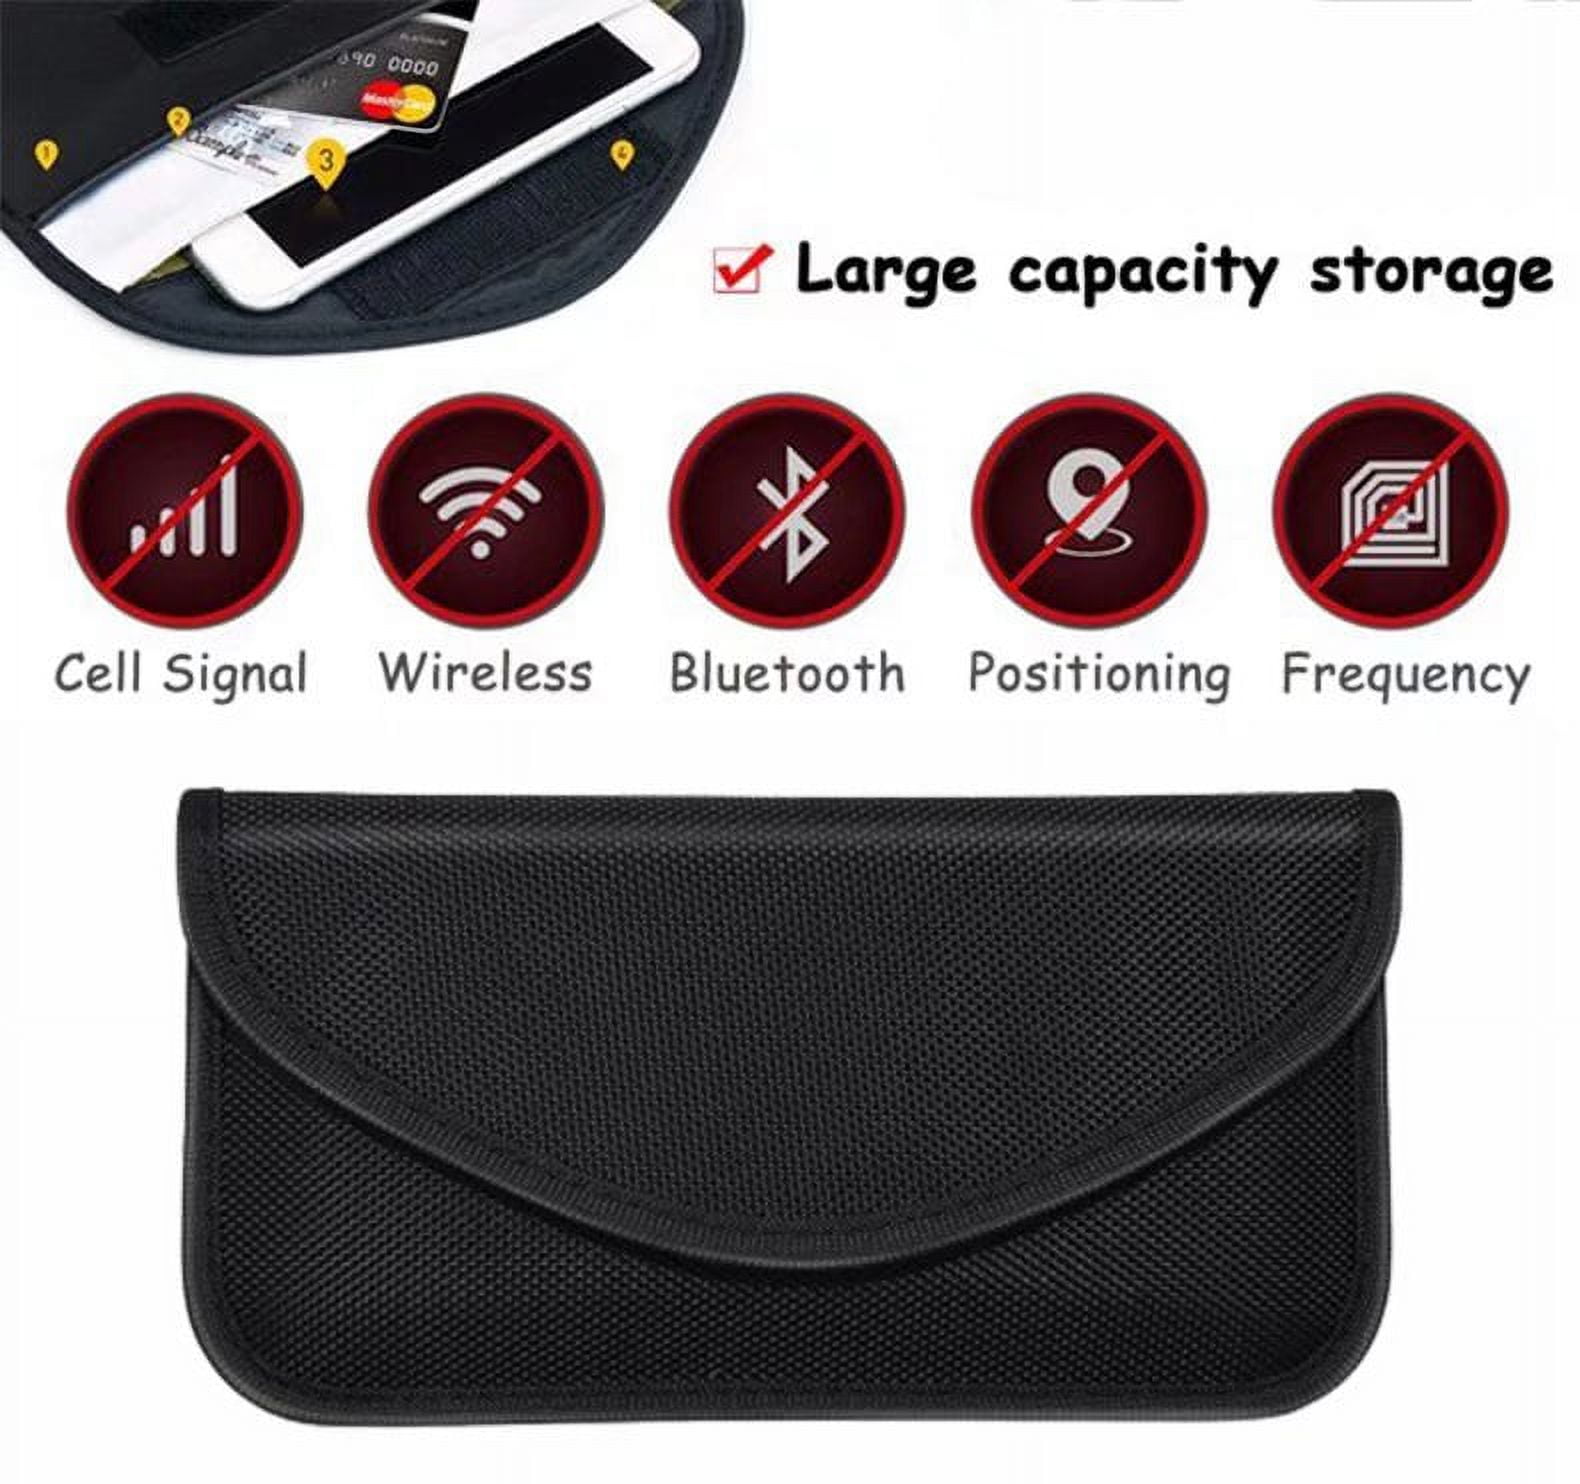 JACKET Forensic Faraday Cell Phone Bag (4.5 x 8)